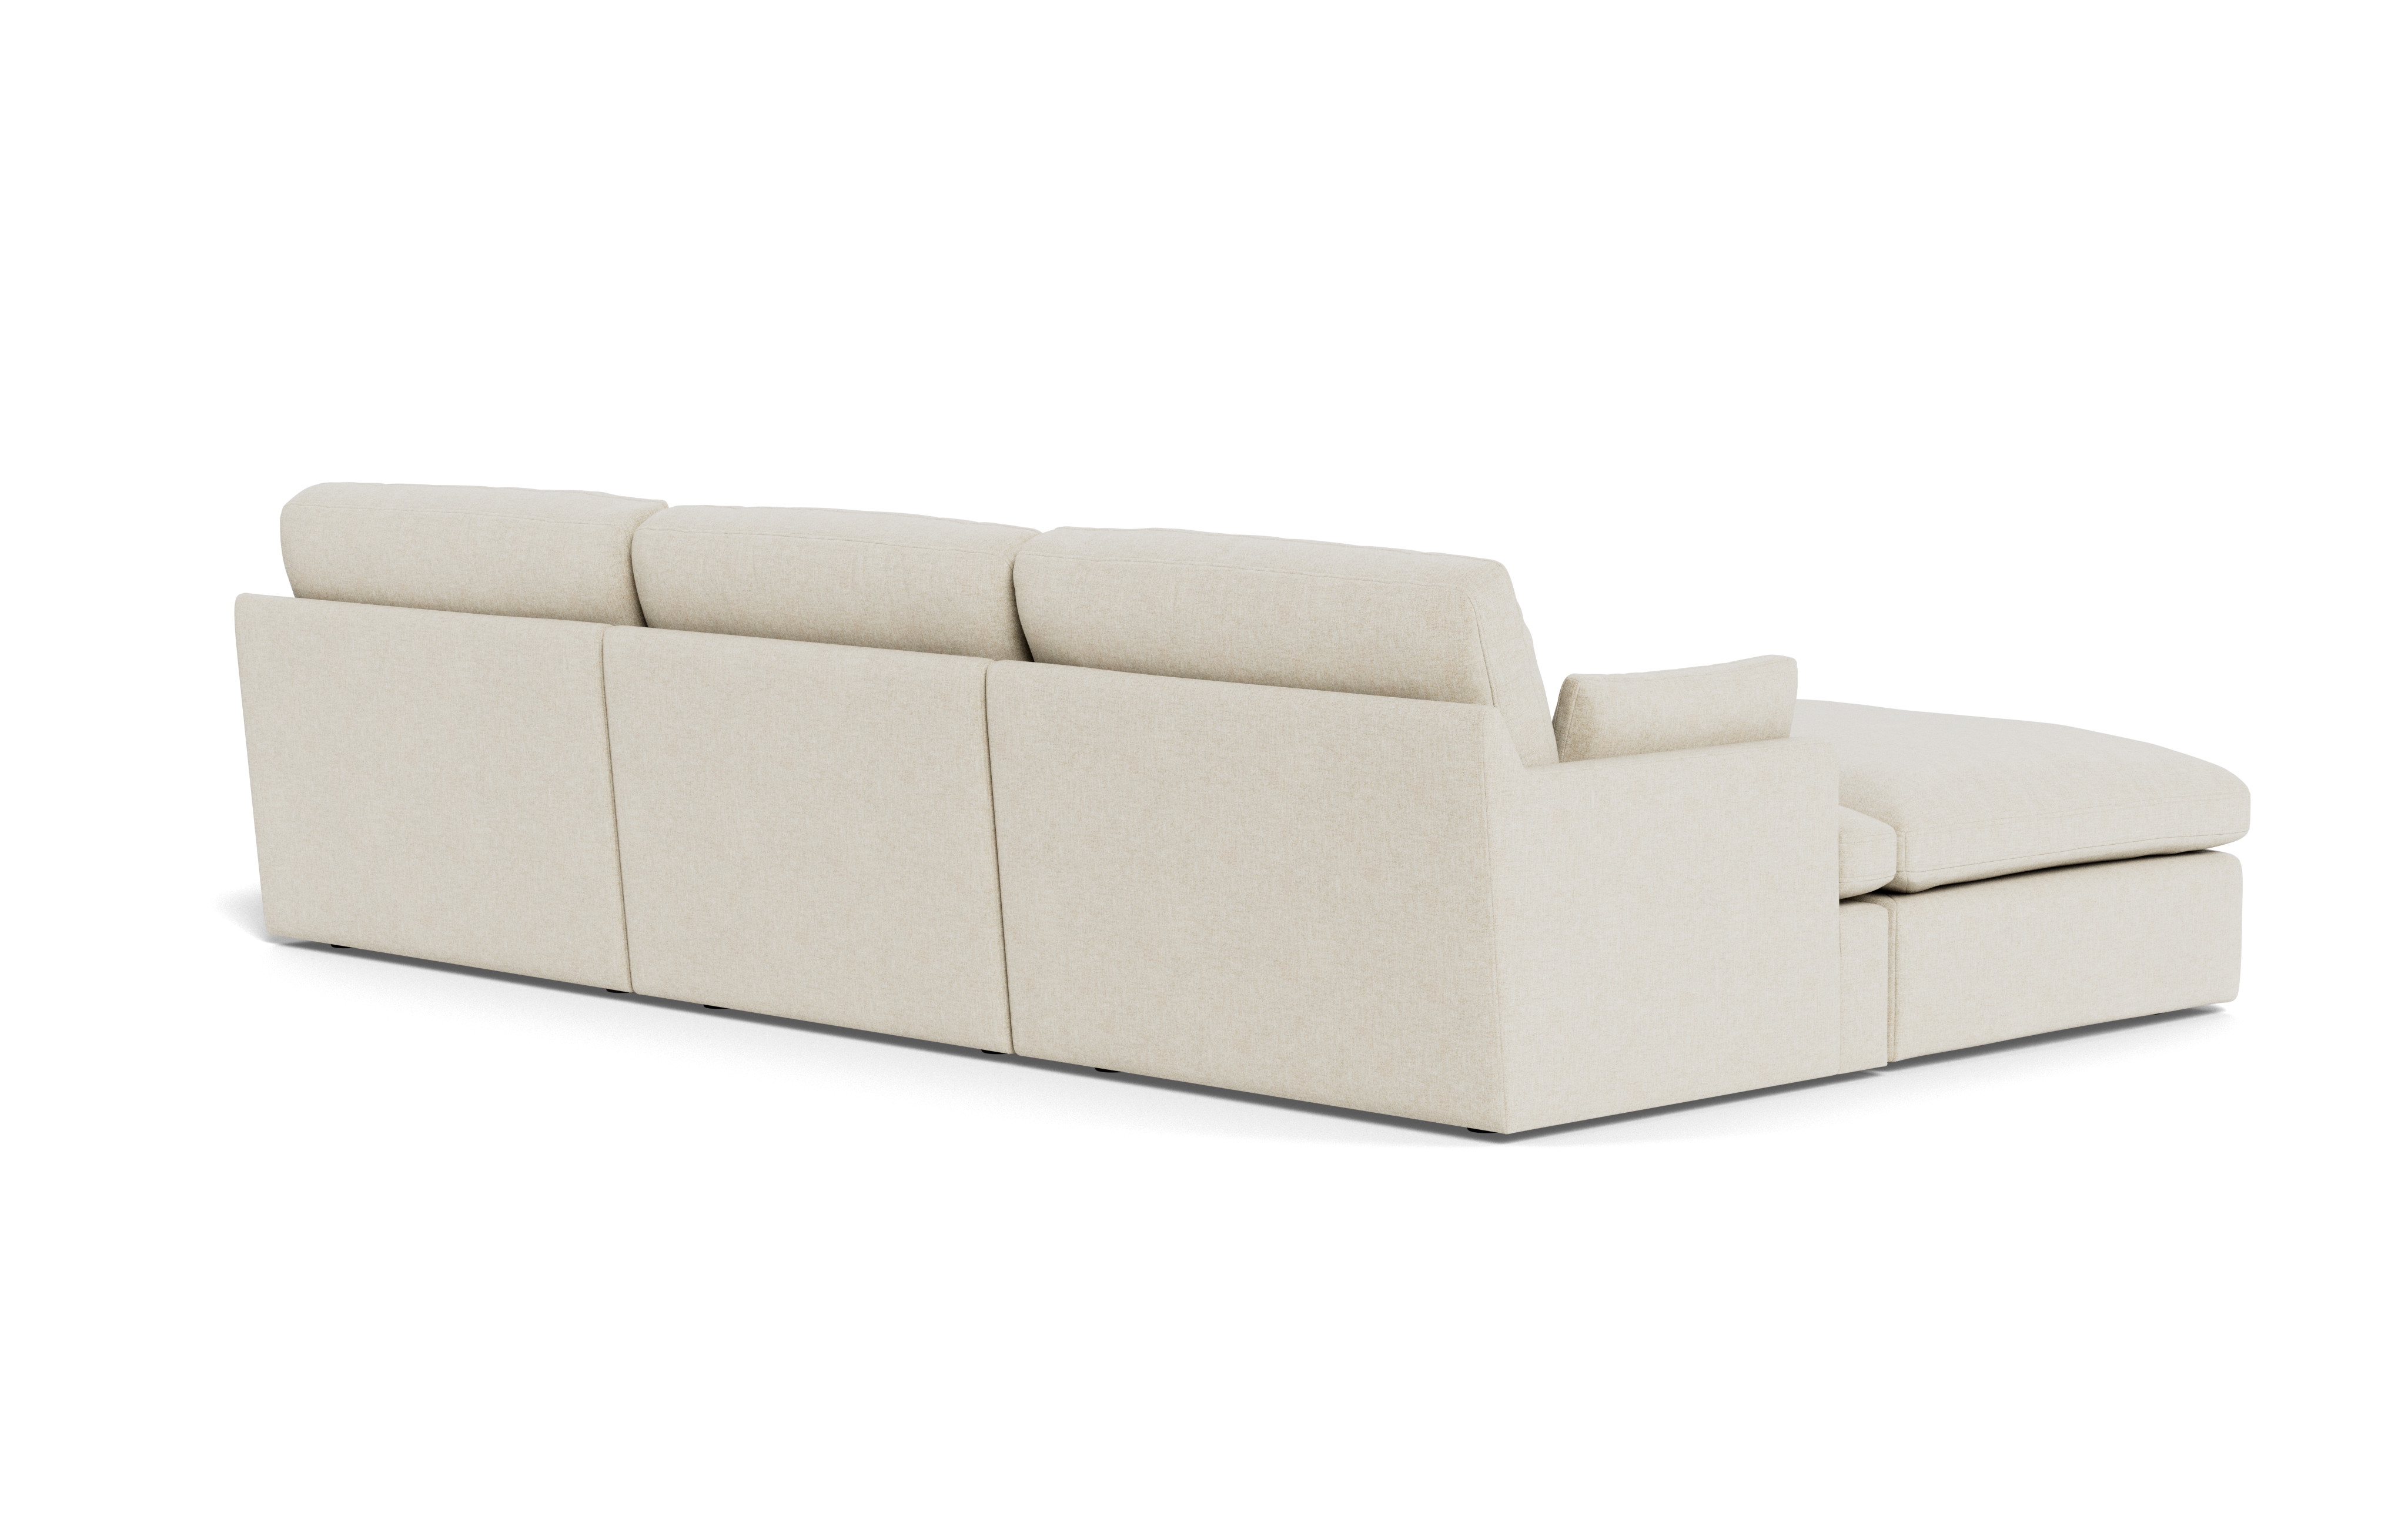 Hayes Modular 3-Seat Reversible Chaise Sectional - Image 2